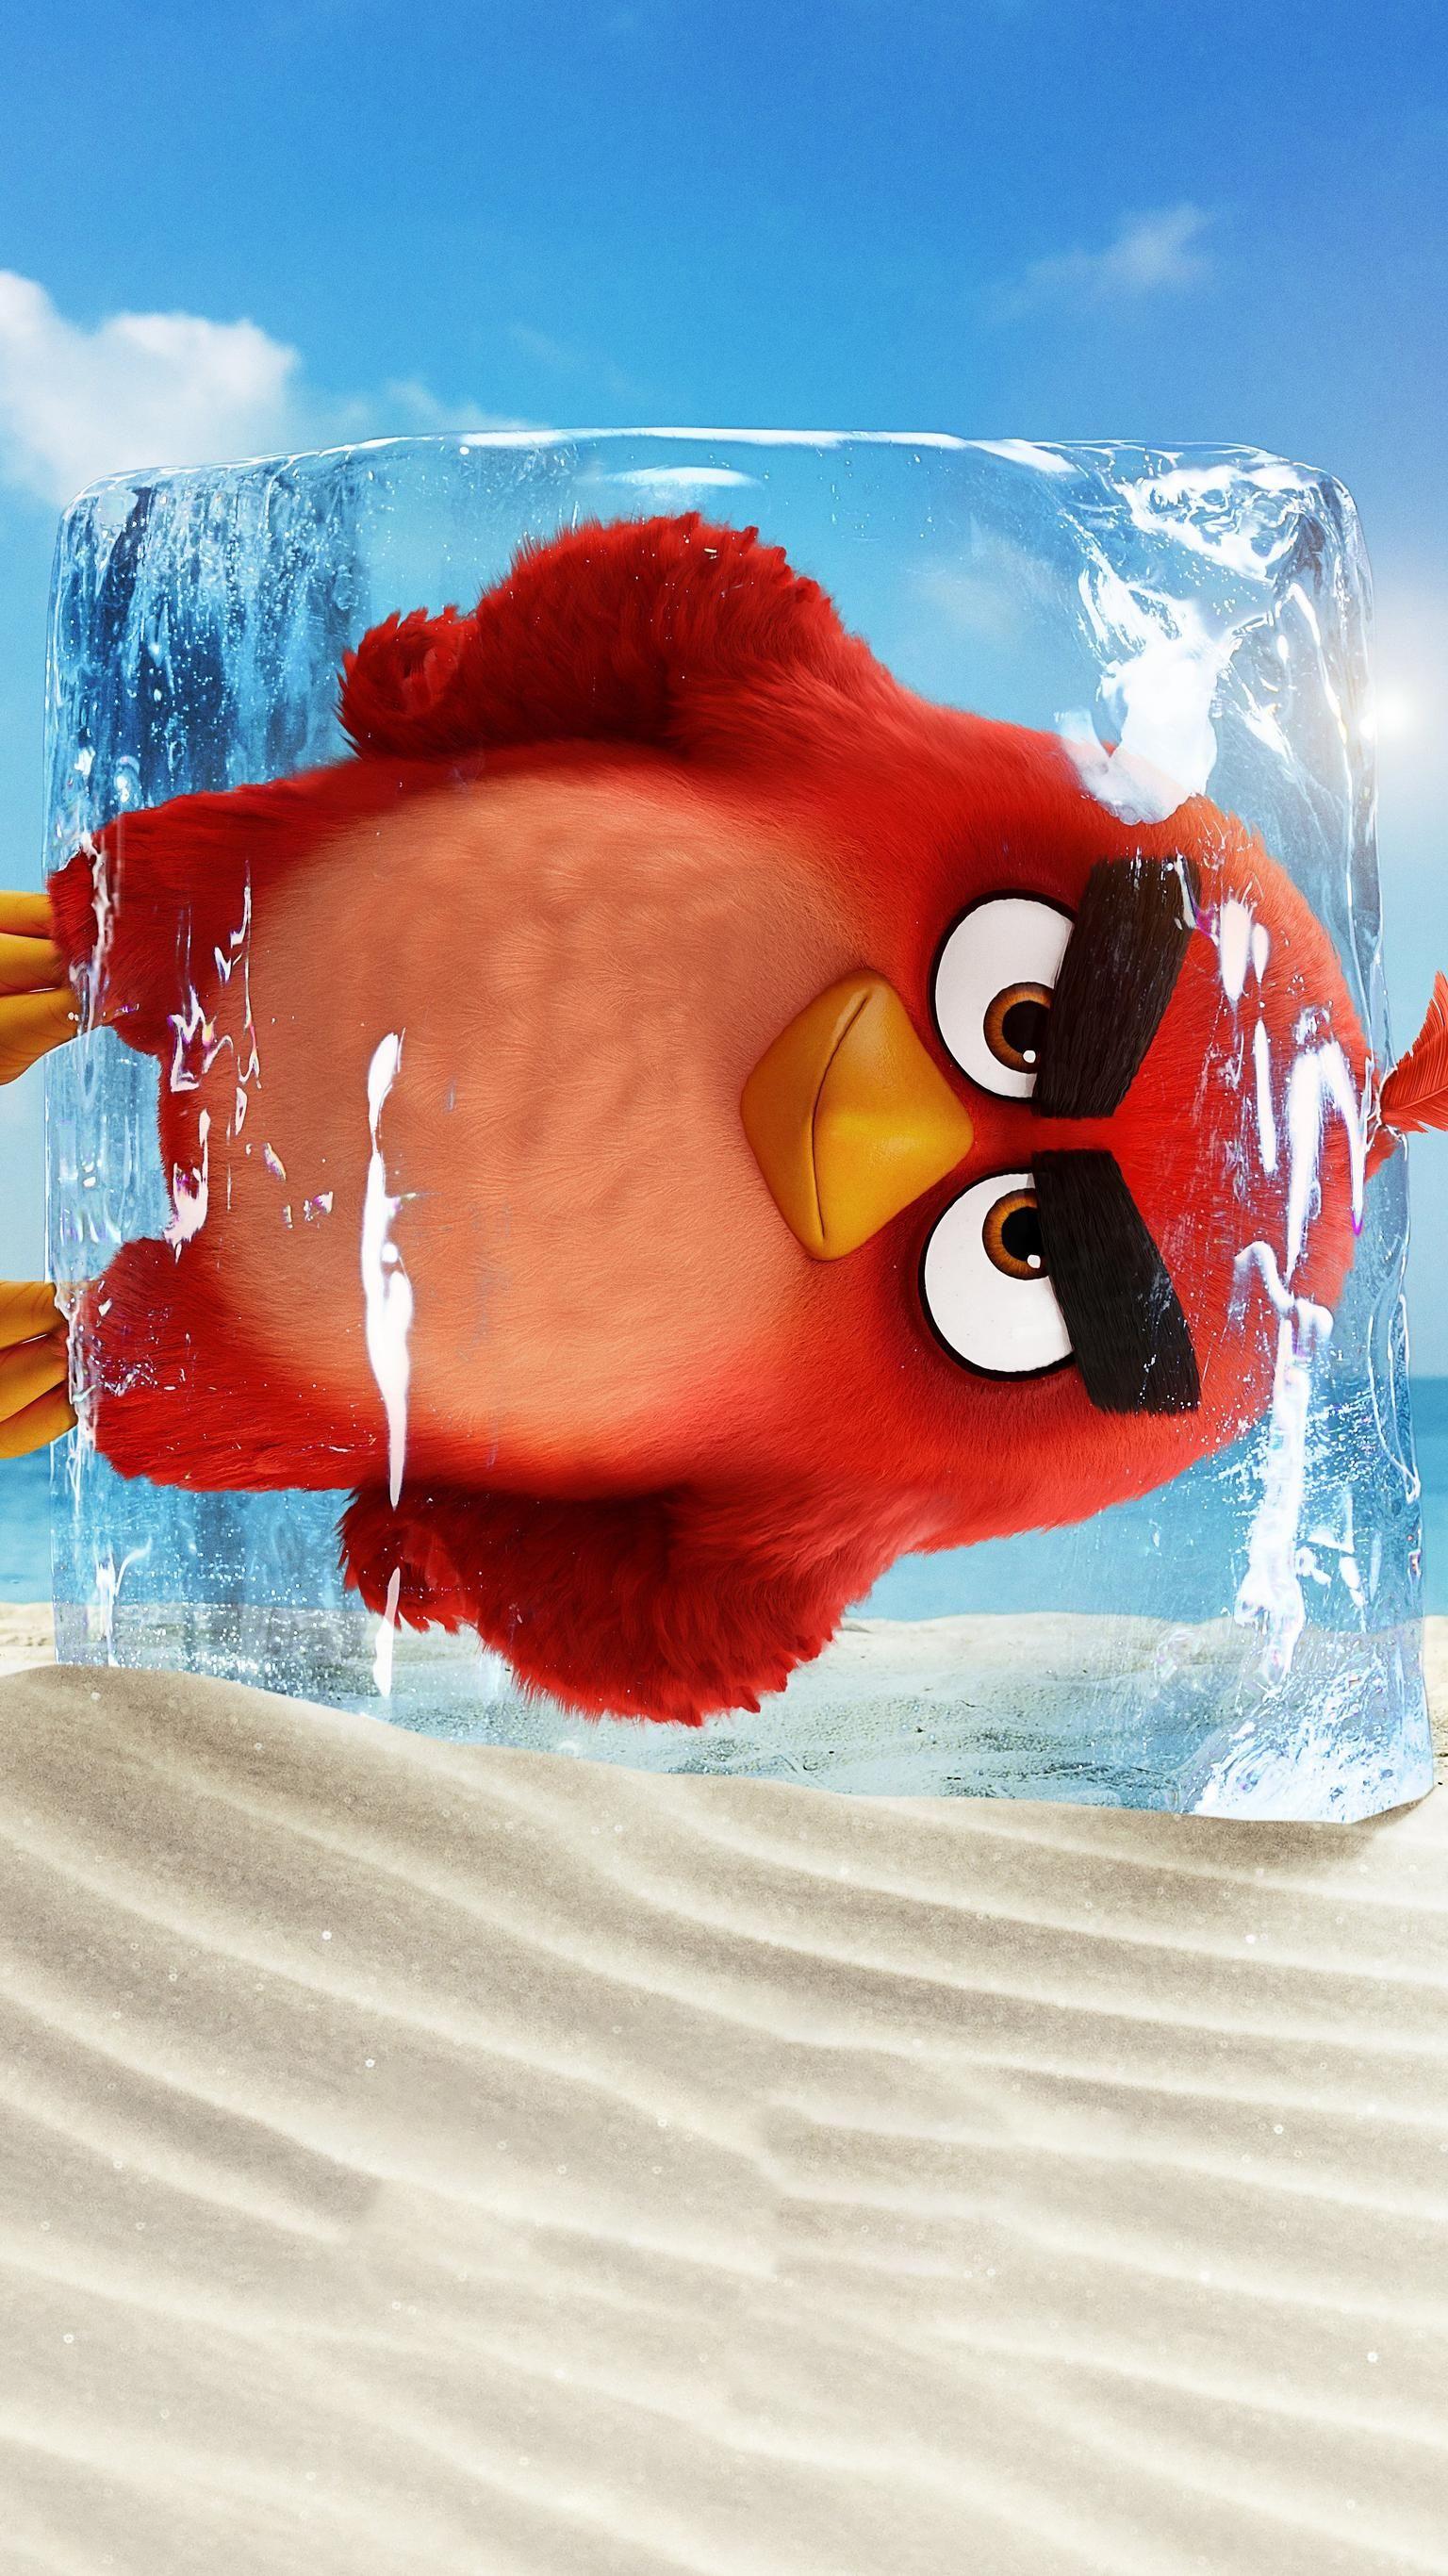 The Angry Birds Movie 2 (2019) Phone Wallpaper. Wallpaper